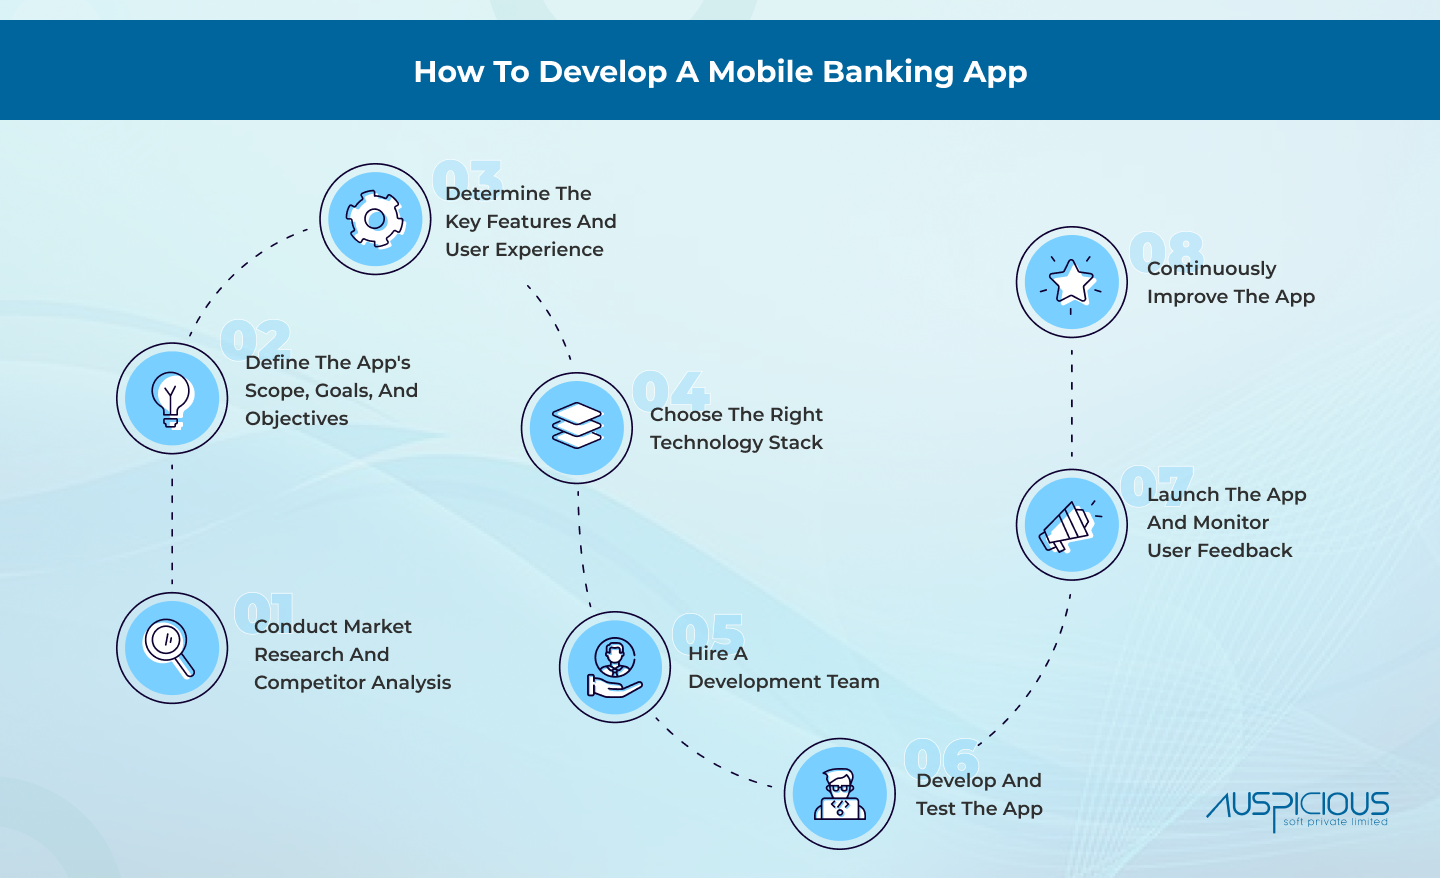 How To Develop A Mobile Banking App: A Step-By-Step Guide